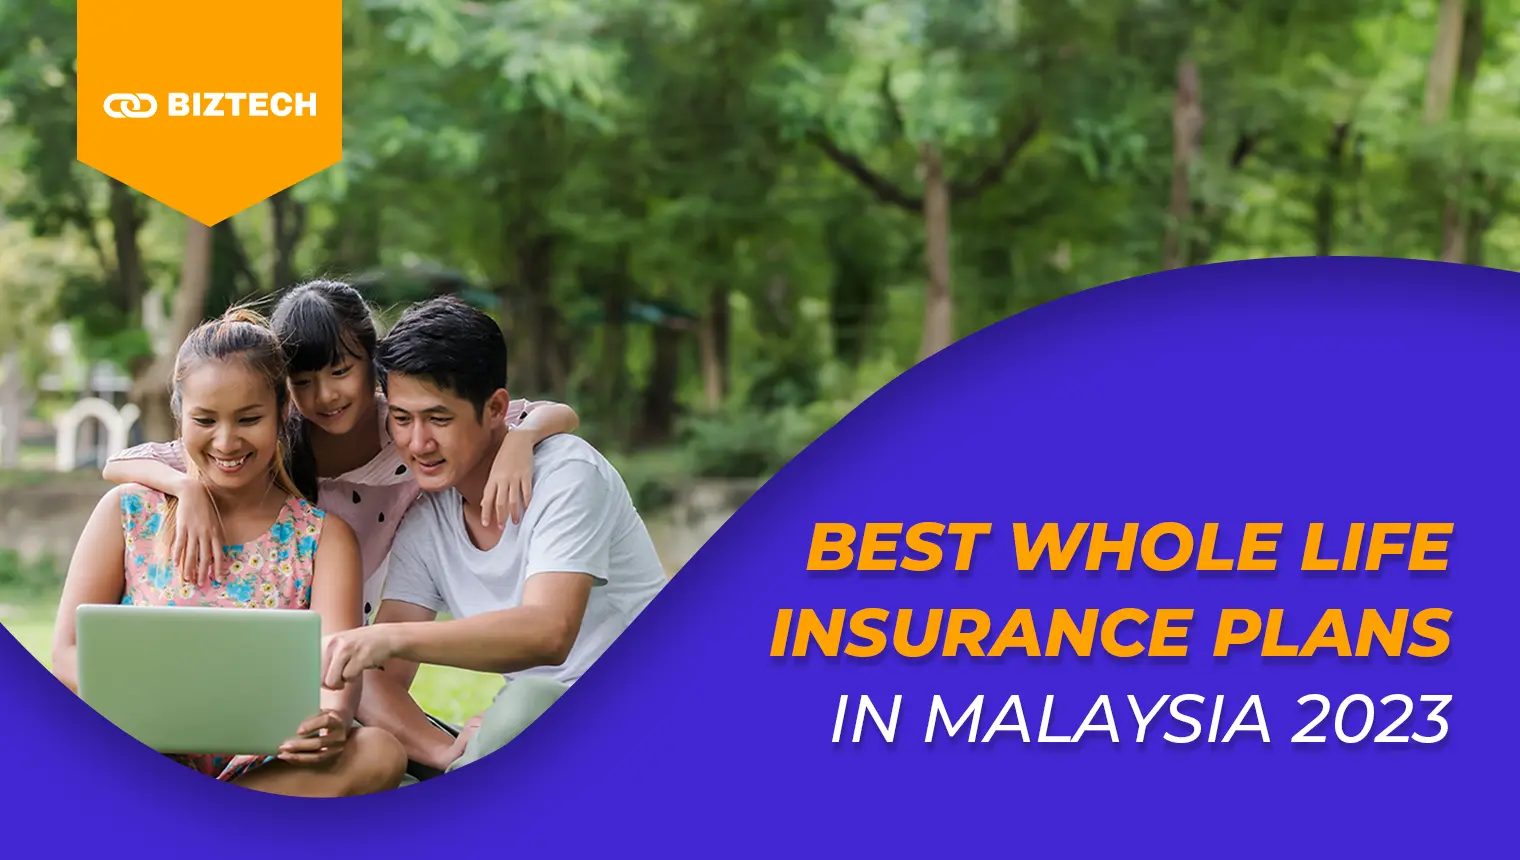 Best Whole Life Insurance Plans in Malaysia 2023